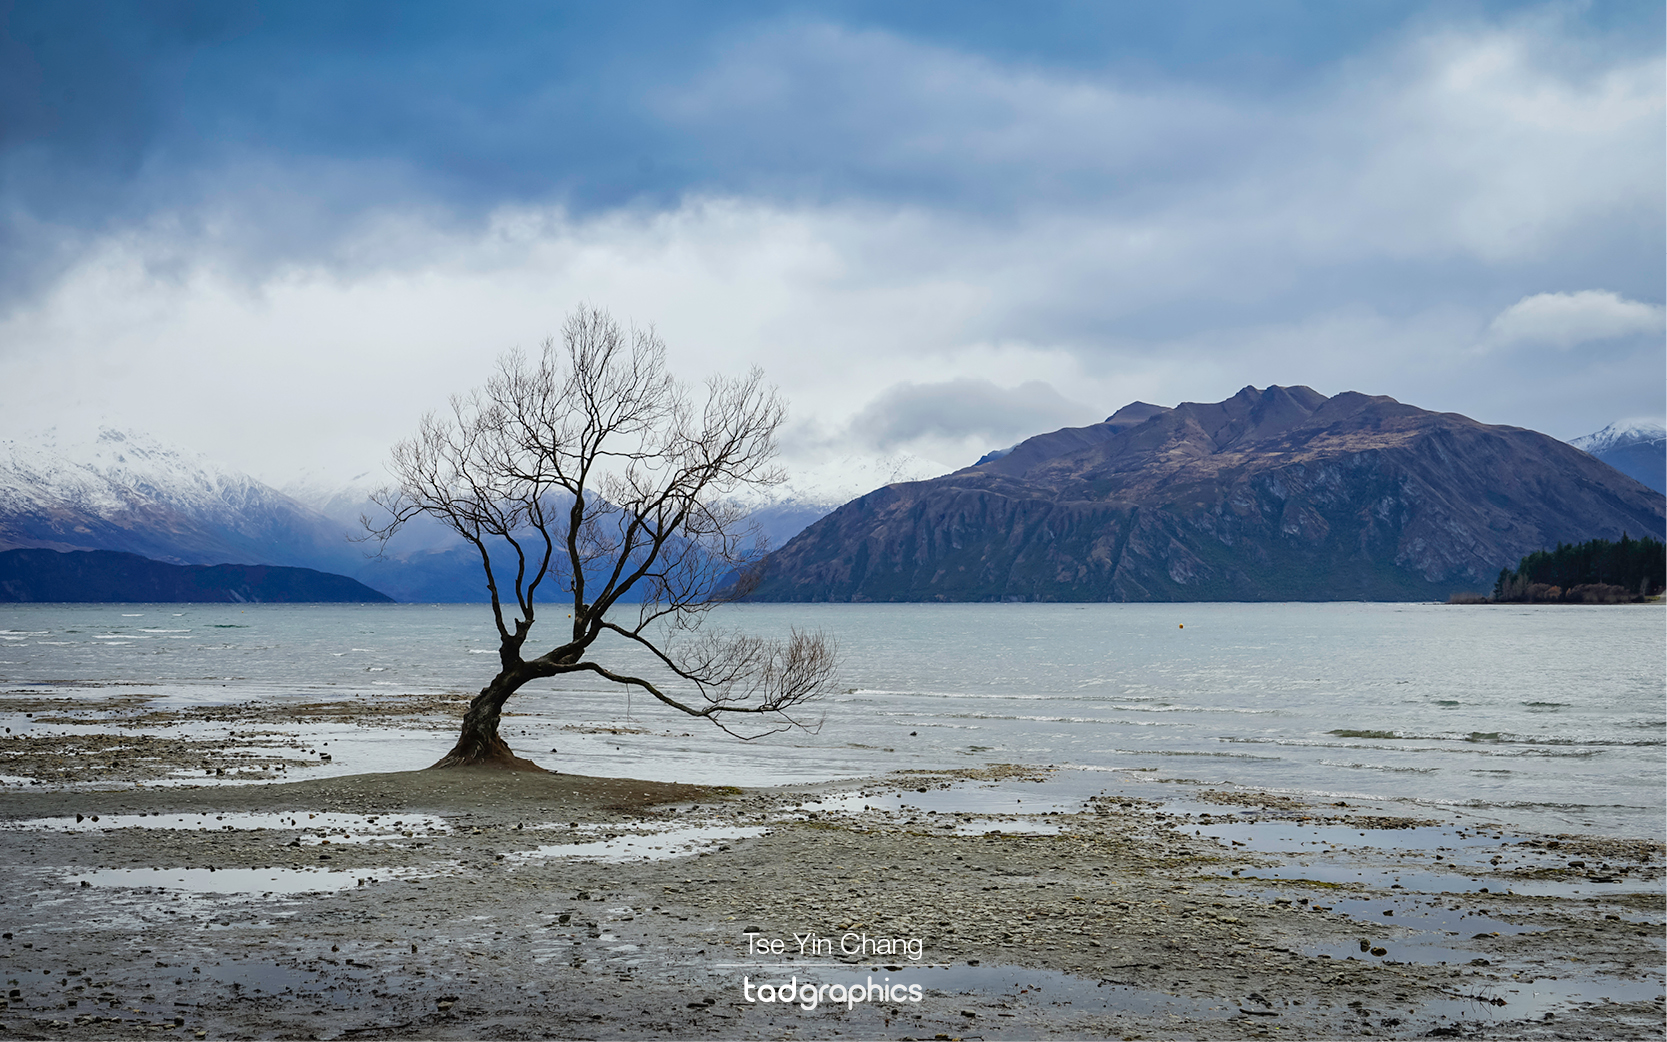 The famous Wanaka Tree is the most photographed tree in New Zealand